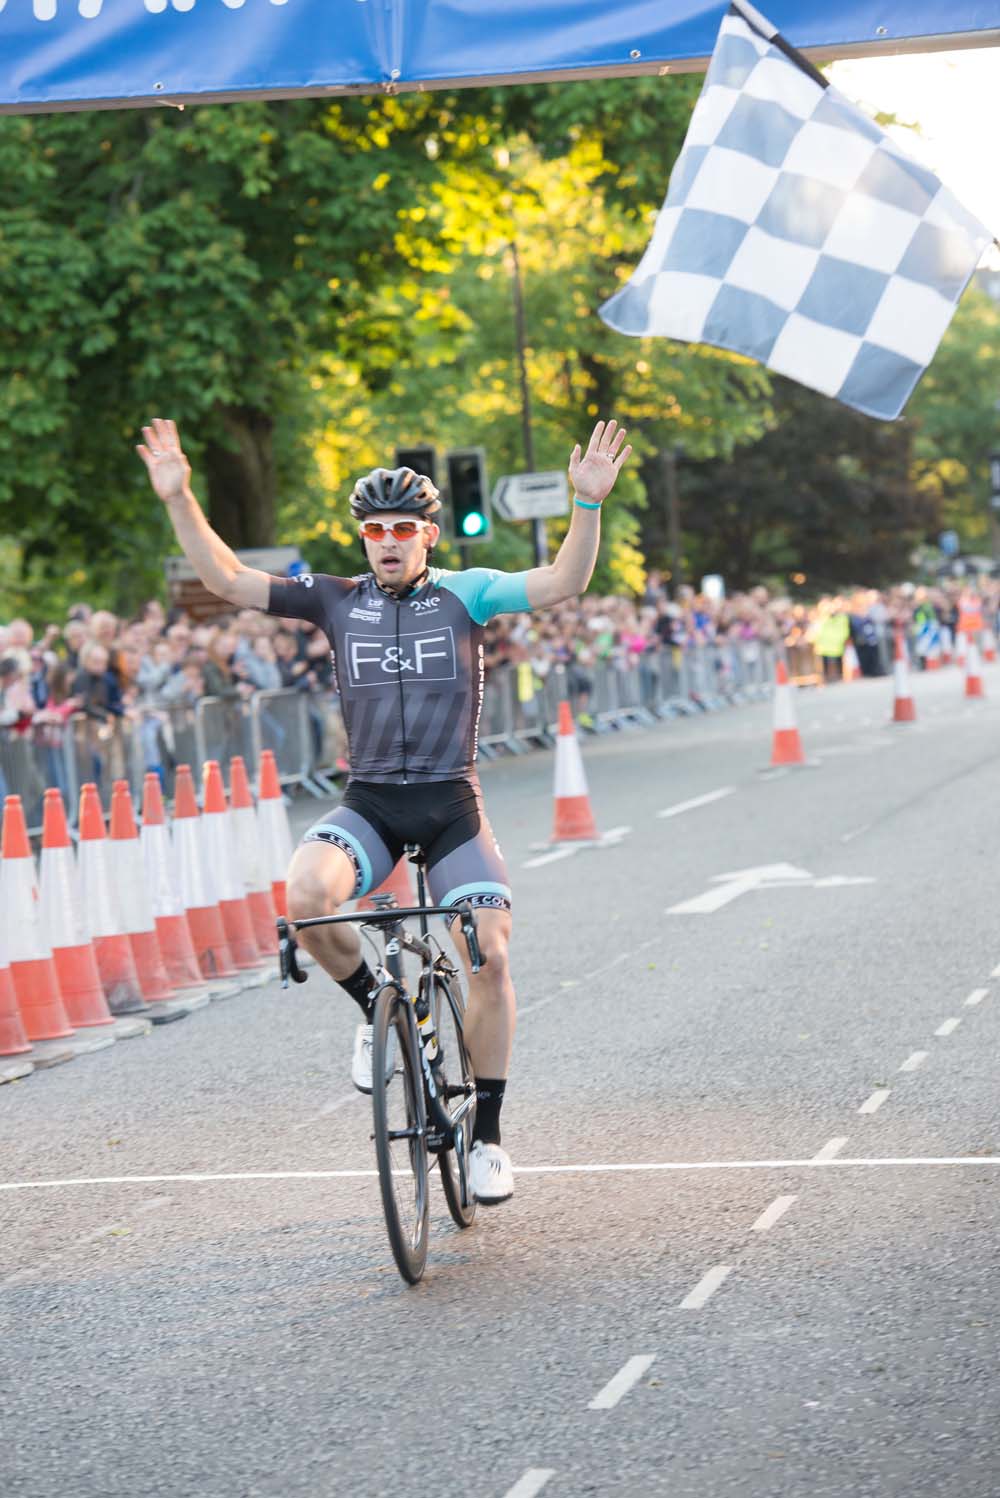 Chris Opie from One Pro Cycling clinched victory in the Elite Race